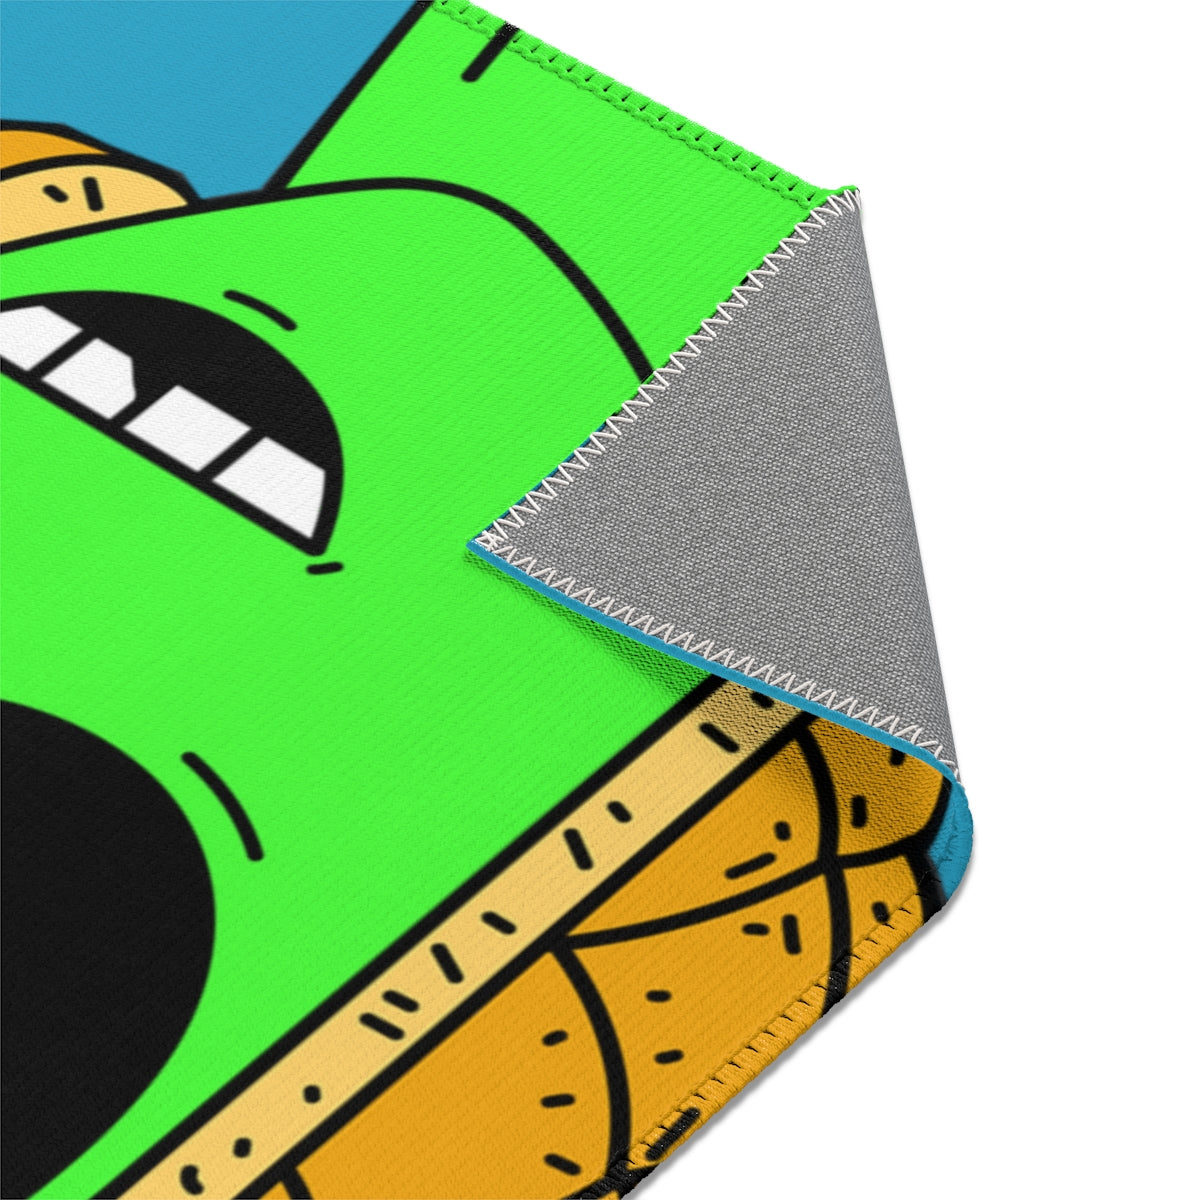 Pineapple Head Visitor Green Alien Chipped Tooth Area Rugs - Visitor751